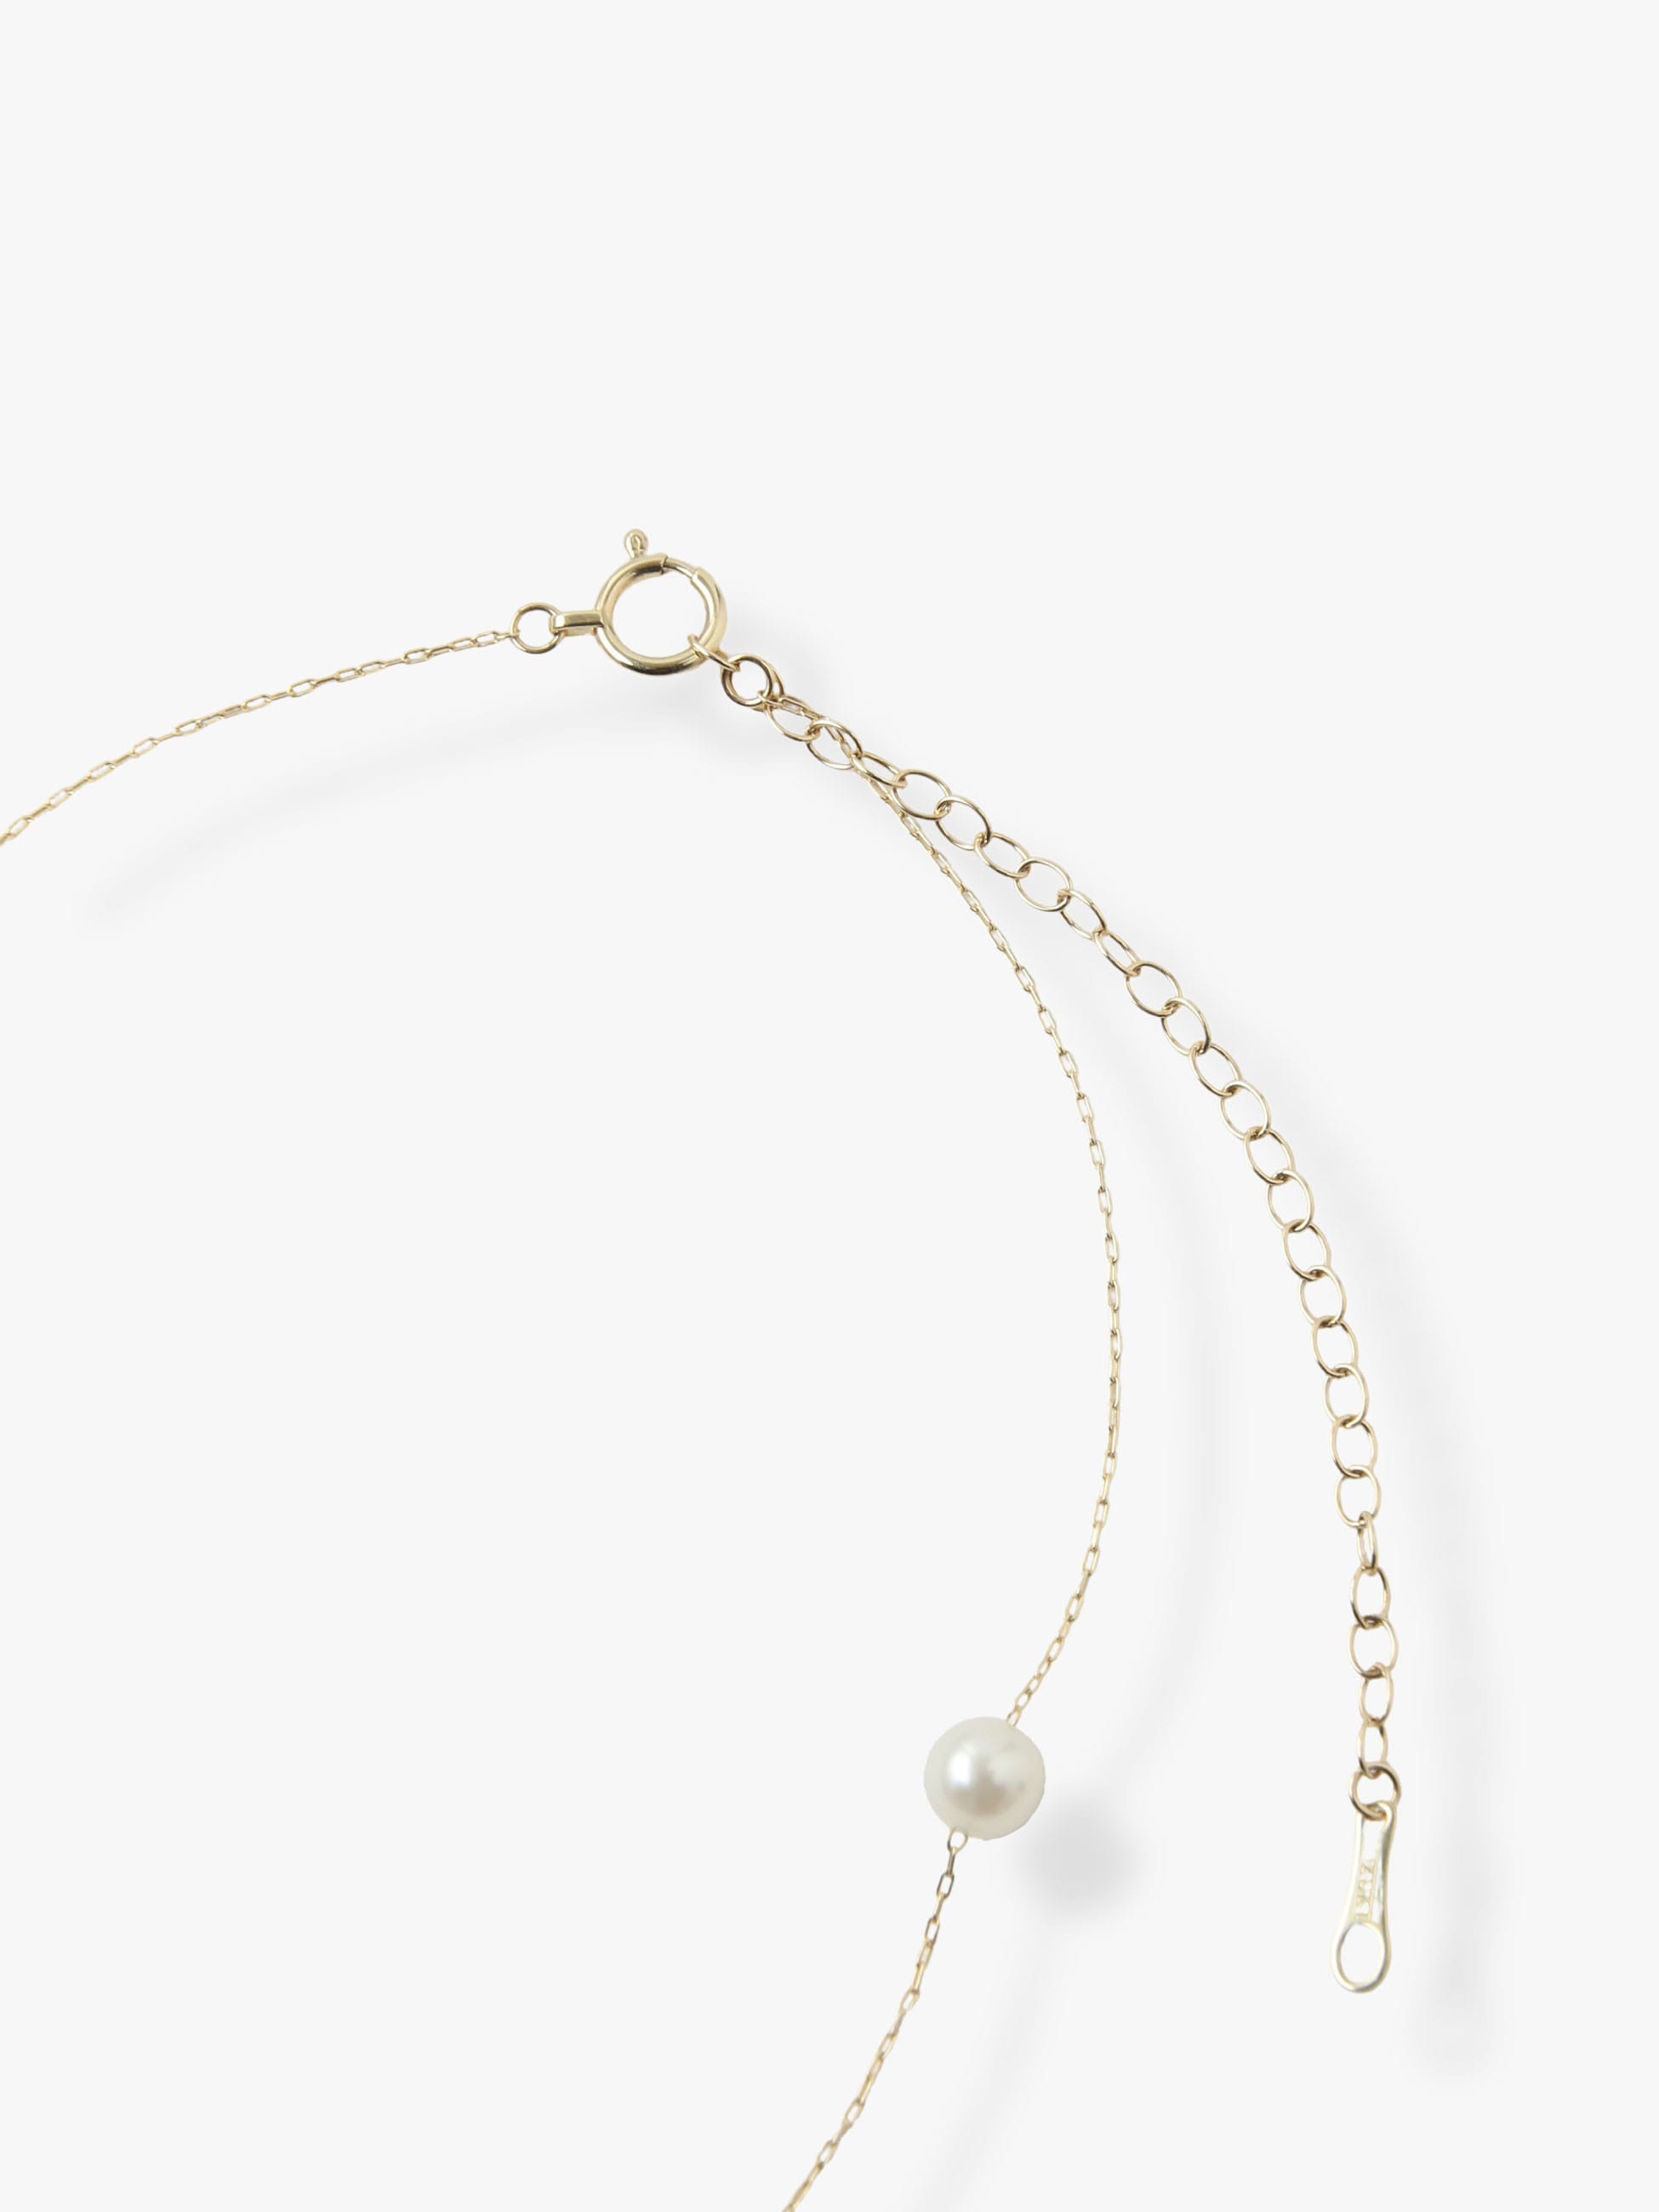 Adjustable Chain Akoya Pearl Necklace 詳細画像 other 2